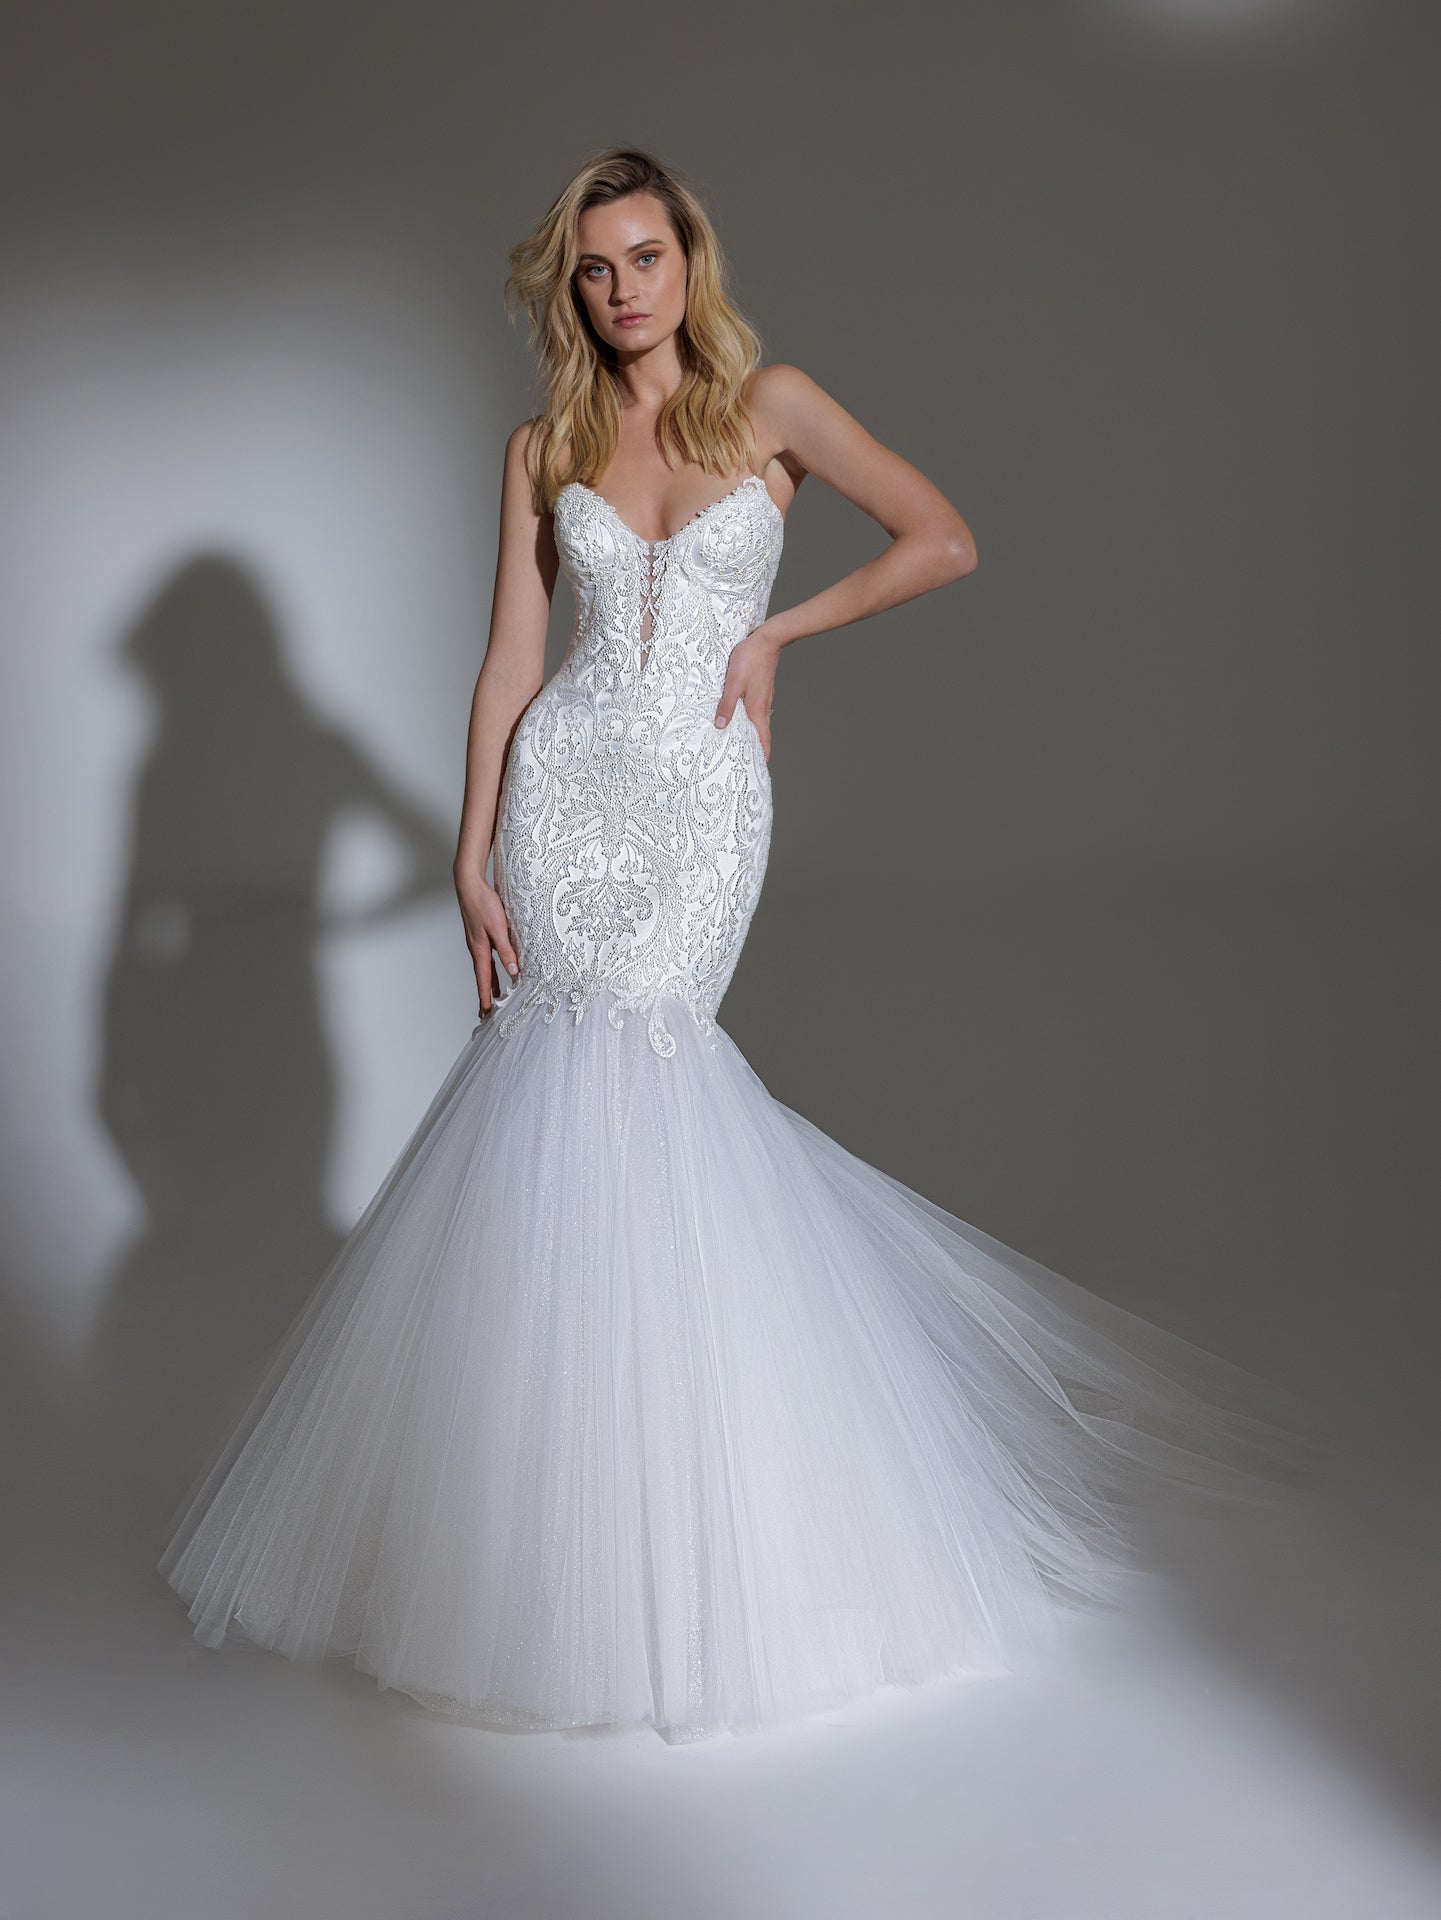 Strapless Sweetheart Neckline Embroidered Lace Mermaid Wedding